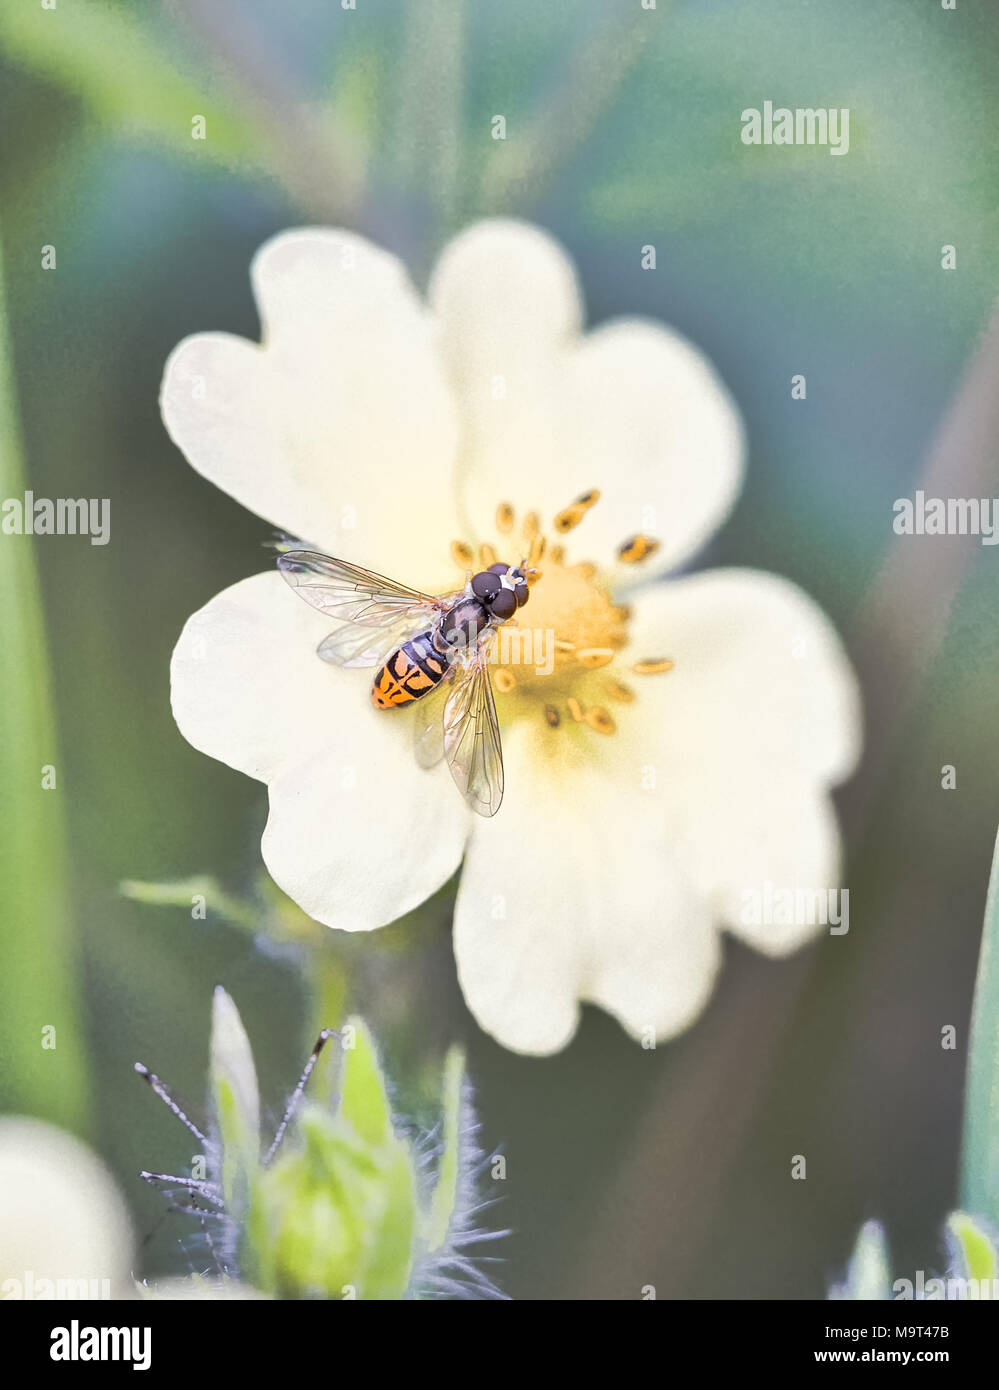 A Syrphid pair Stock Photo